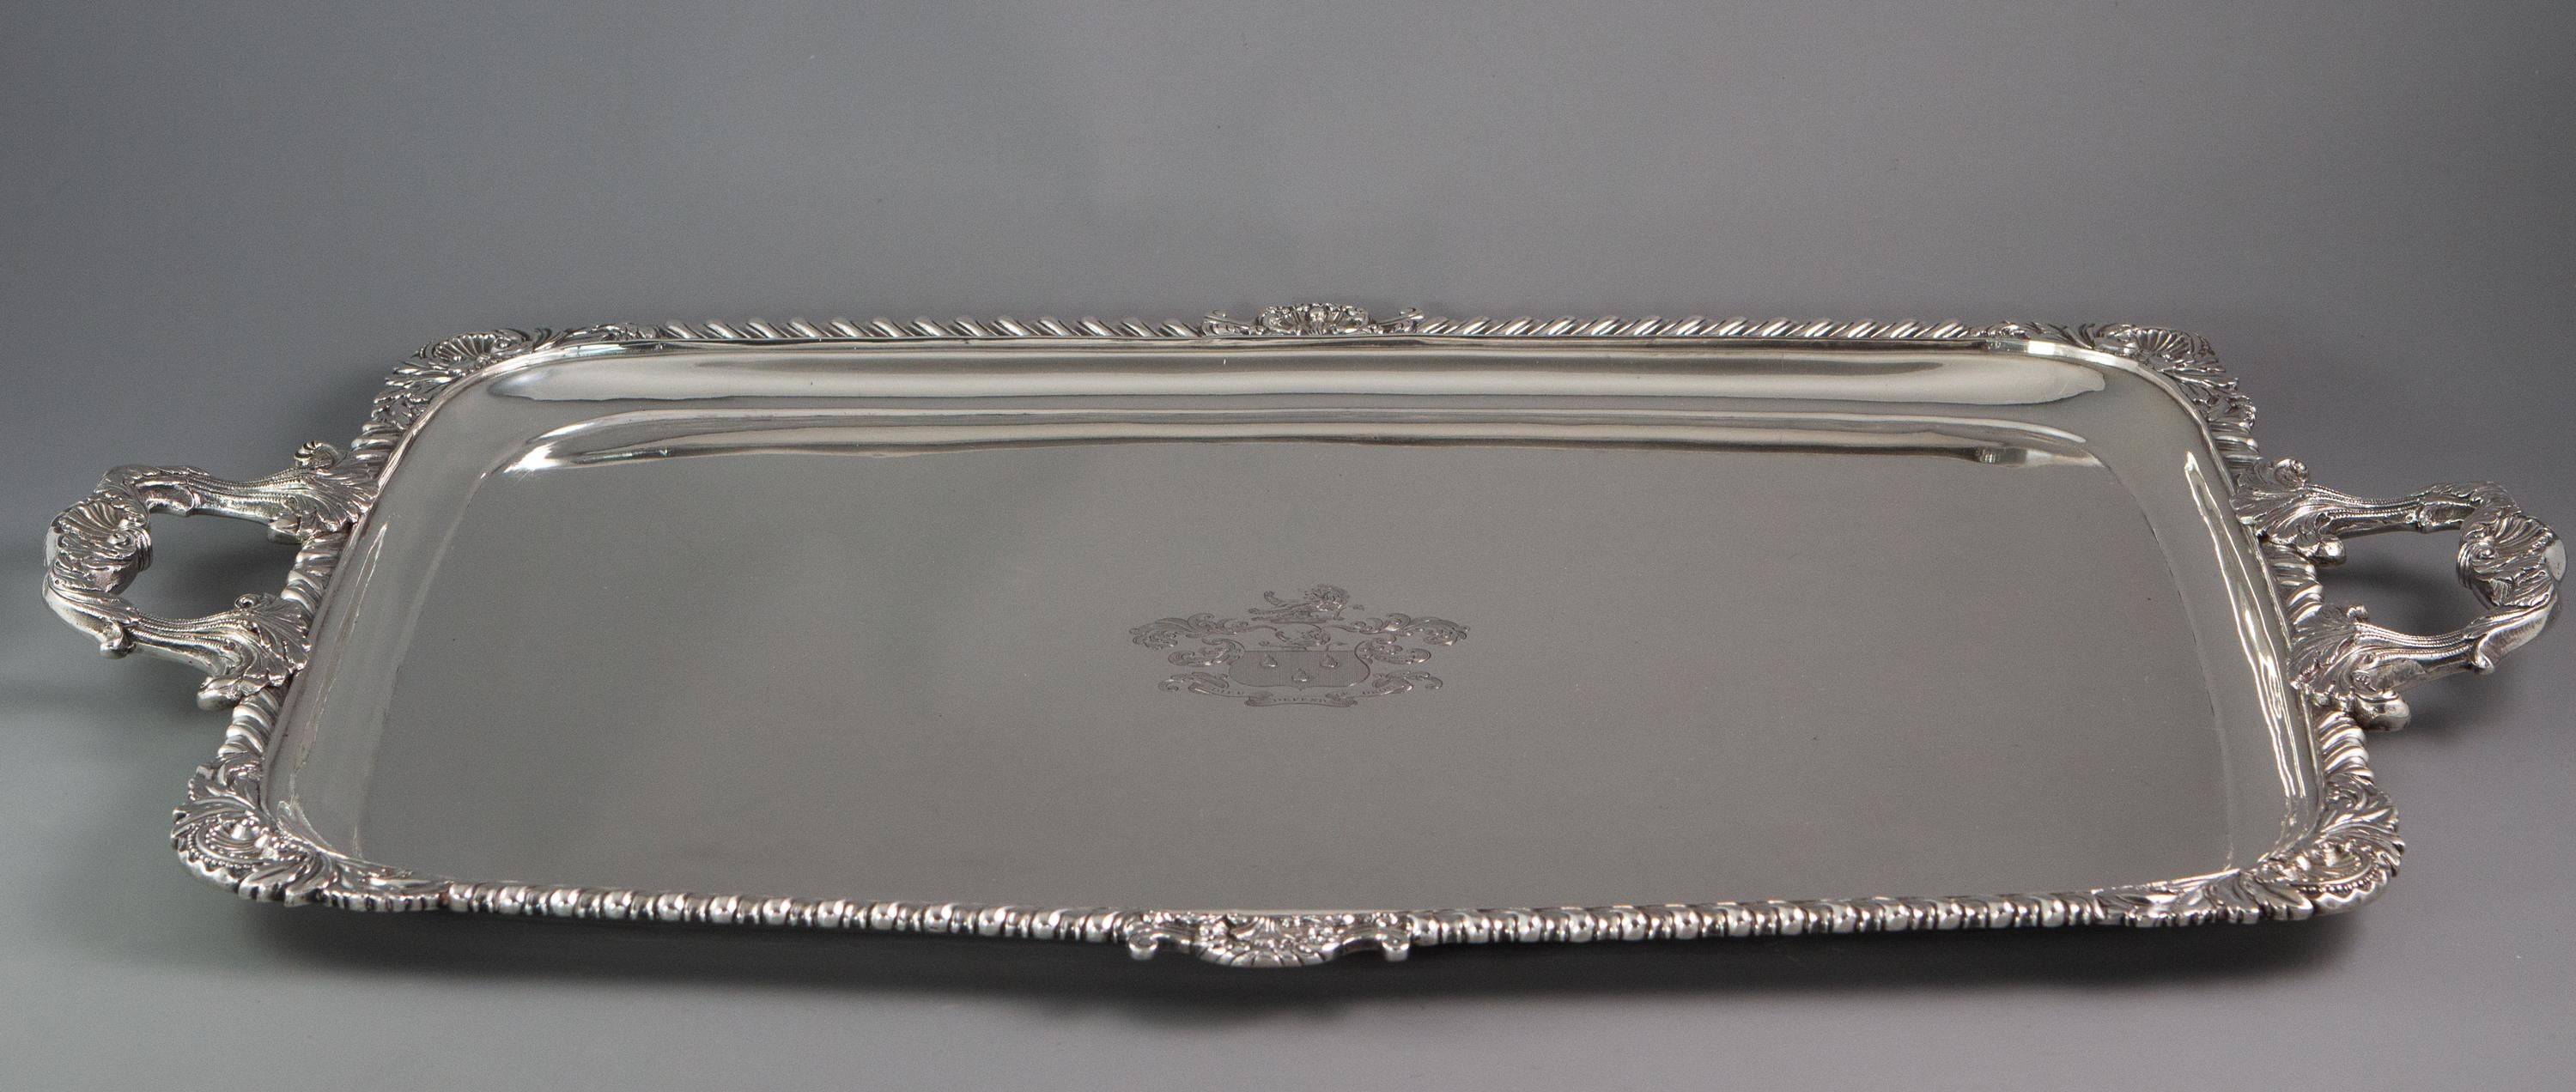 A very fine Irish Georgian twin handled silver tea or drinks tray with shell and scroll corners and gadrooned edges. The cast and applied handles with sheaves of leaves and shell and anthemion decoration. The central plate engraved with an armorial